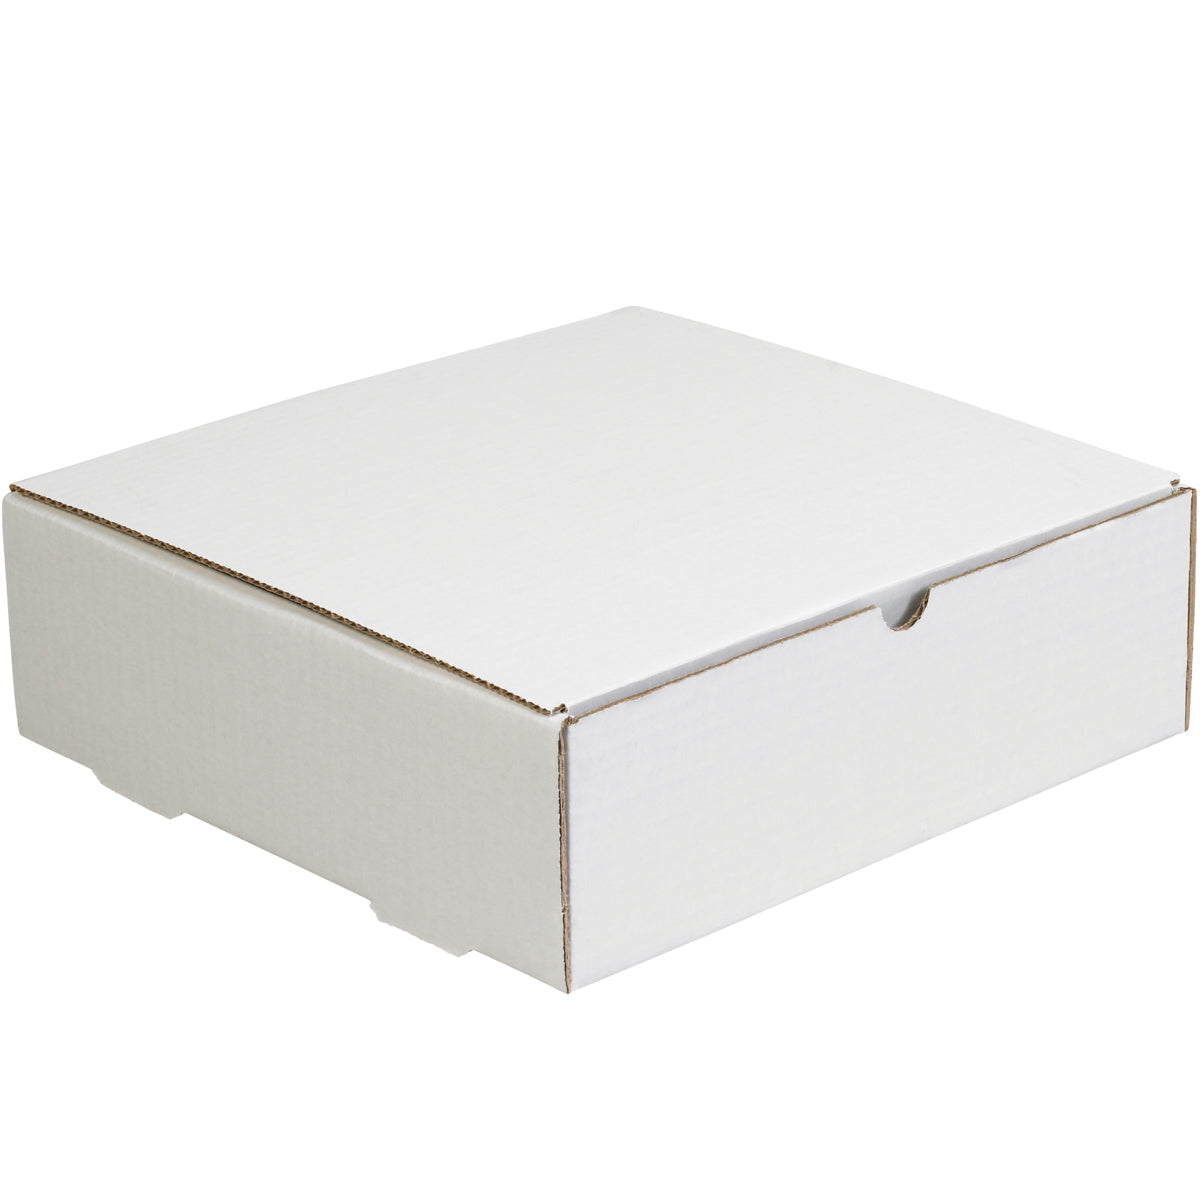 corrugated mailer boxes